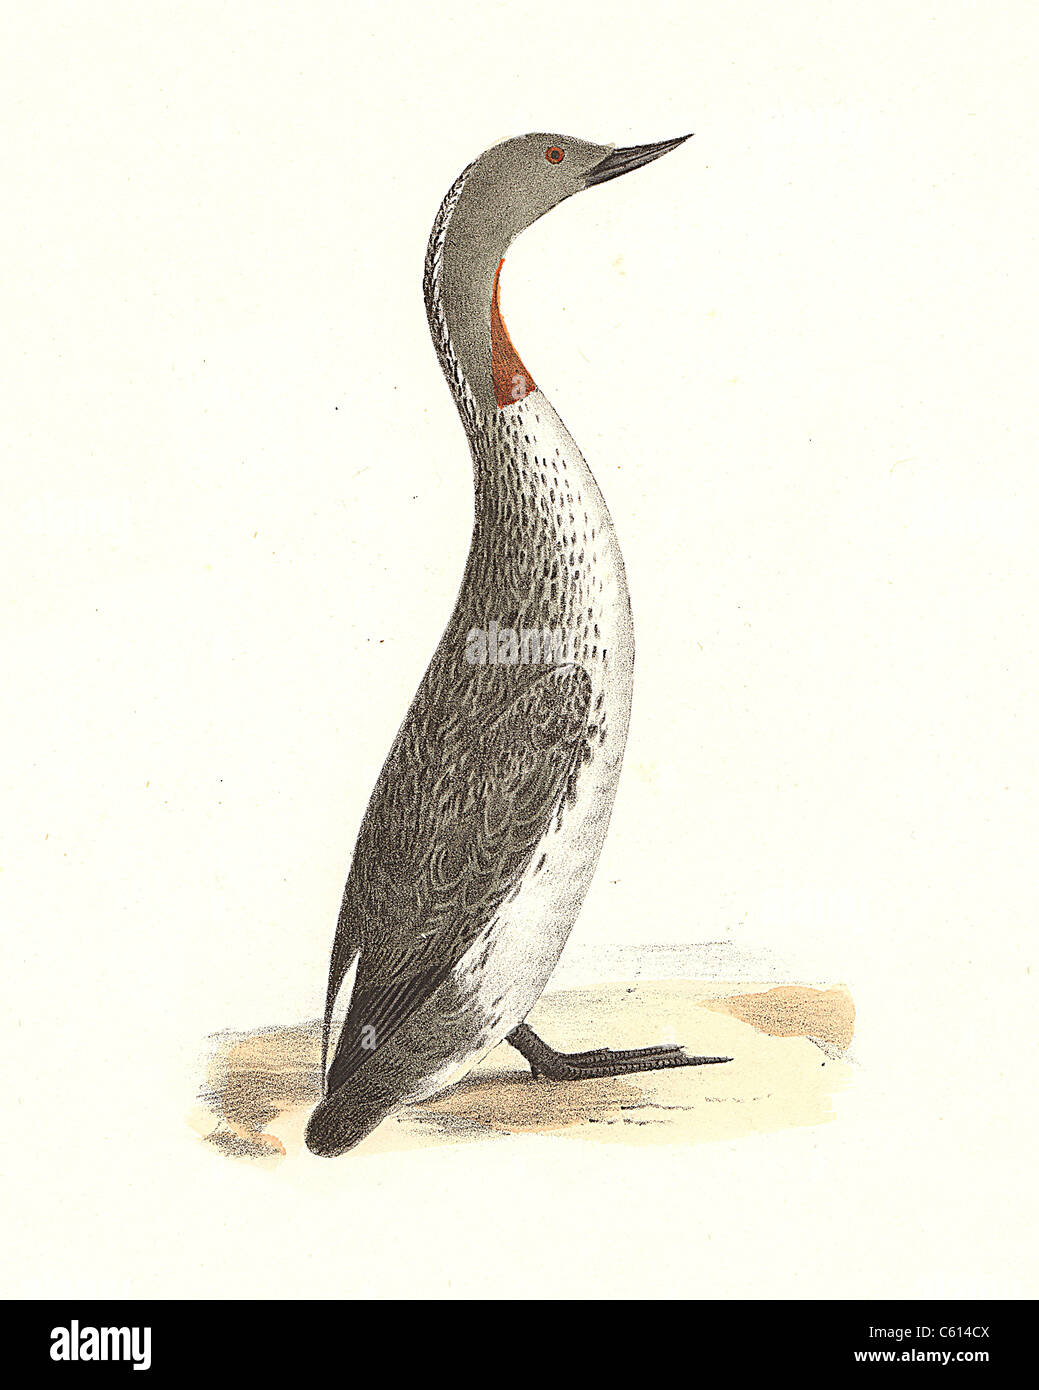 The Red-throated Loon, Red-throated Diver (Colymbus septentrionalis, Gavia stellata) vintage bird lithograph, James De Kay, Zoology of New York, Birds Stock Photo